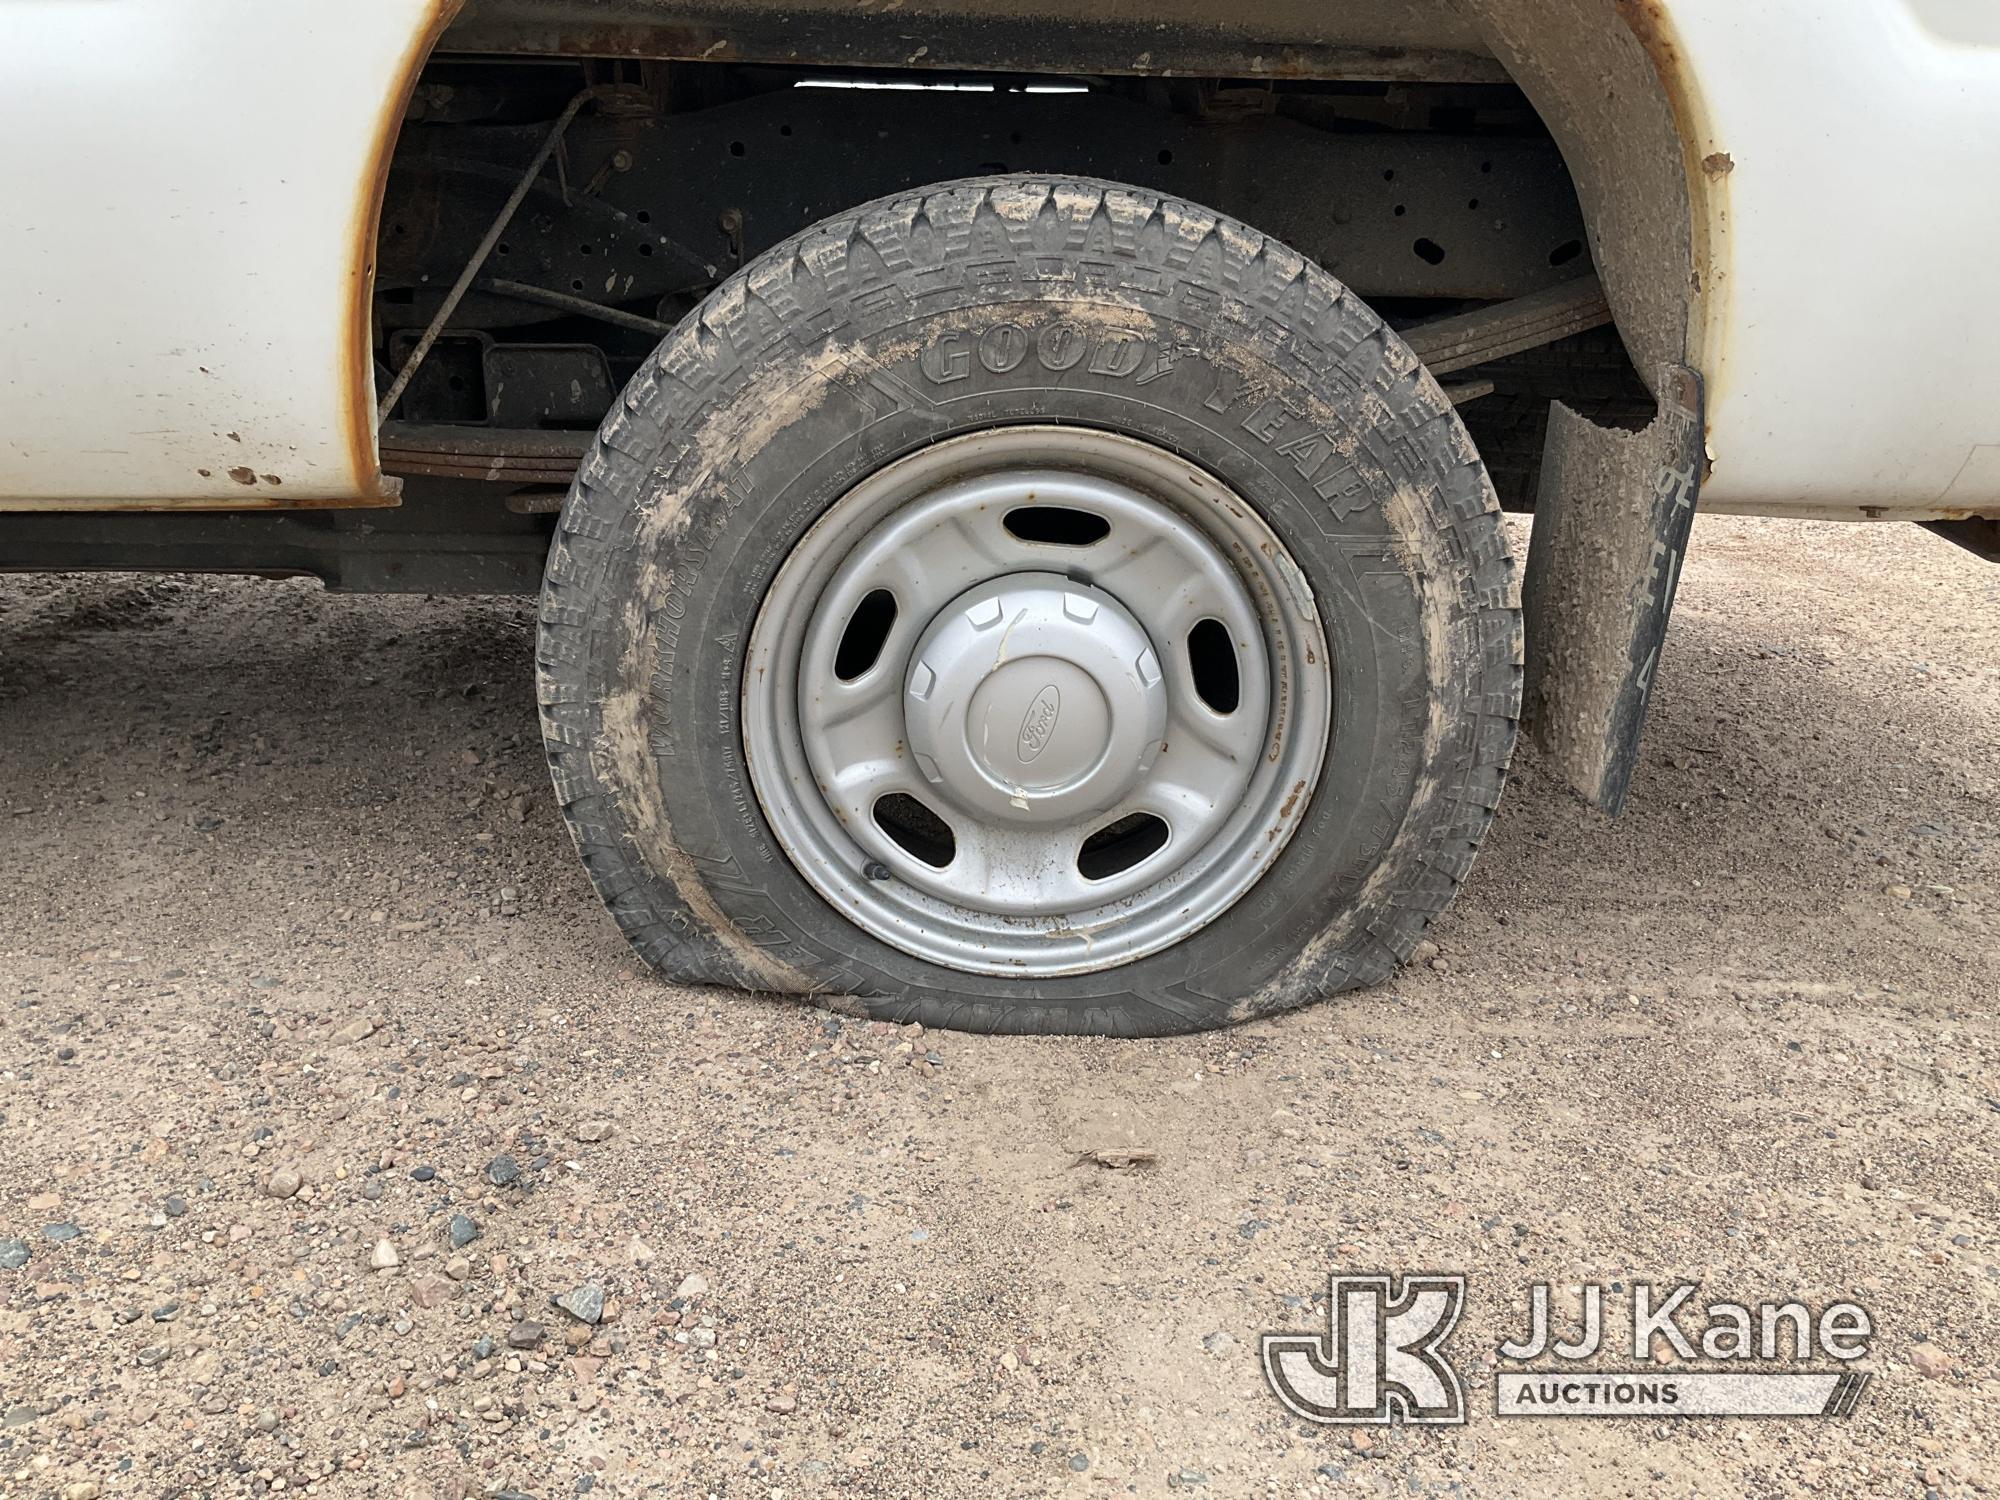 (Shakopee, MN) 2012 Ford F250 4x4 Extended-Cab Pickup Truck Runs & Moves) (Flat tire (1), Vehicle Ar